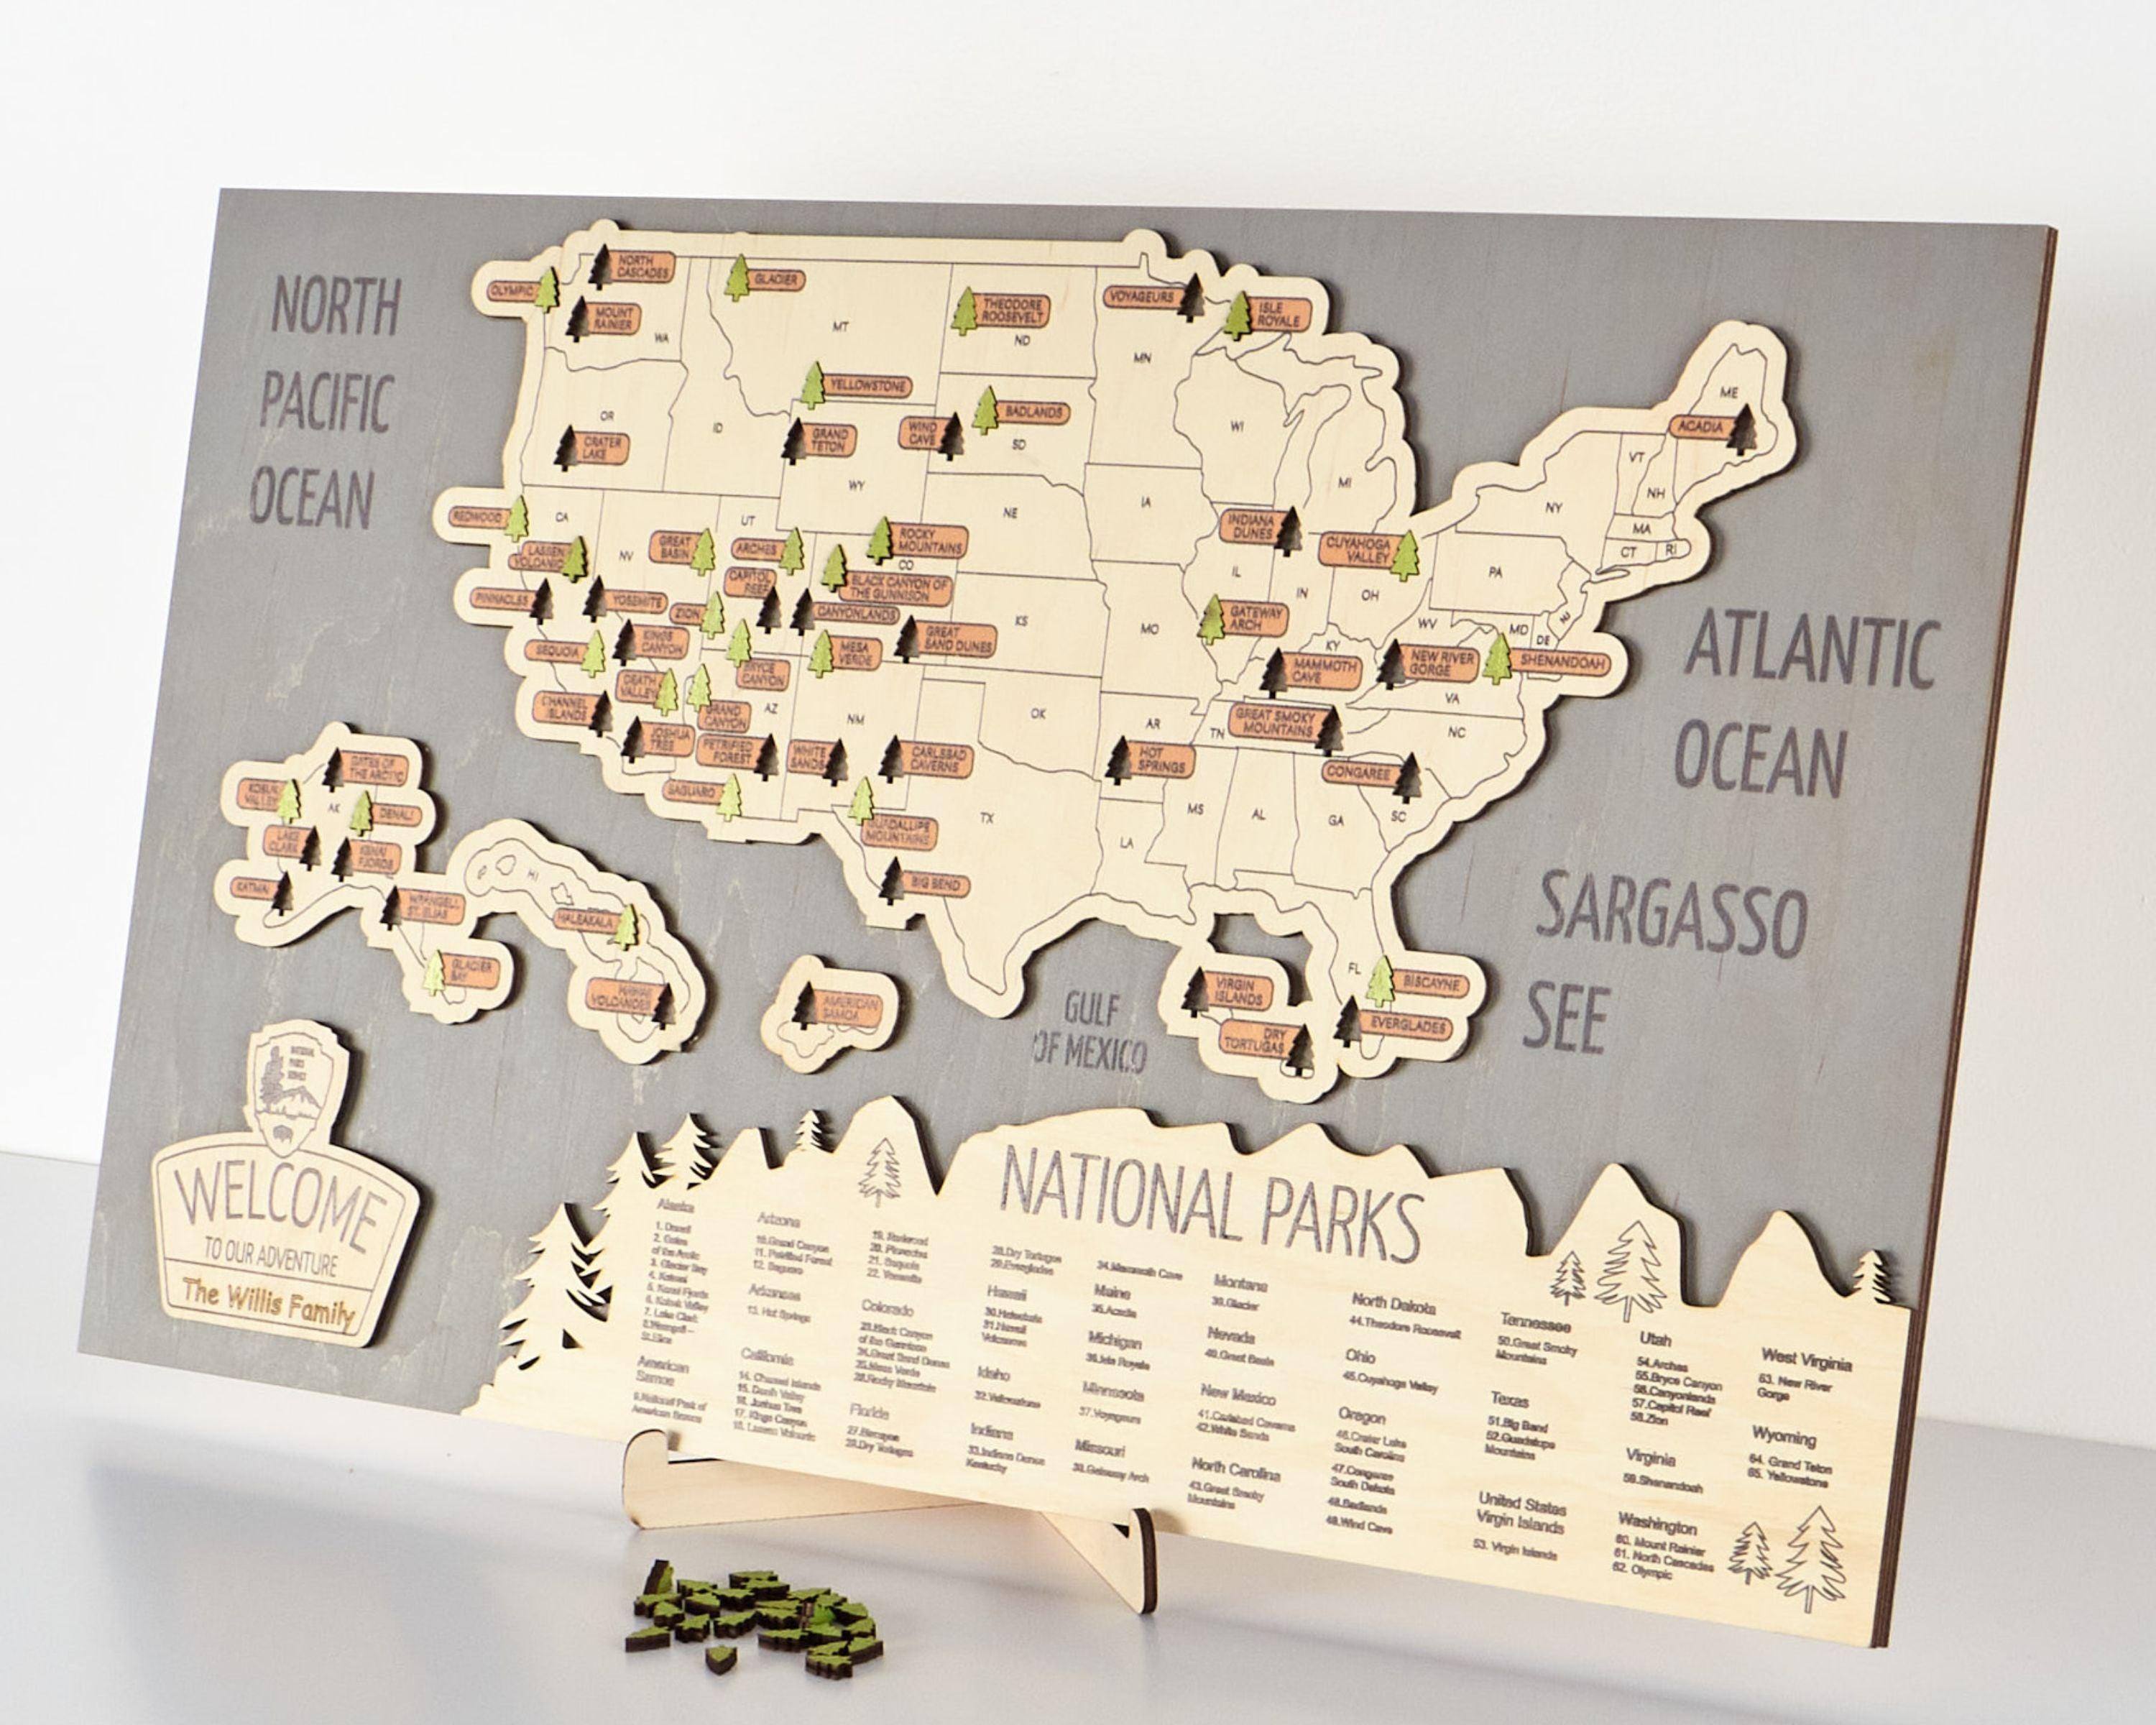 US 3D Wooden National Parks Travel Map With Trees To Record Park Visits (New Light Grey) - Lemap